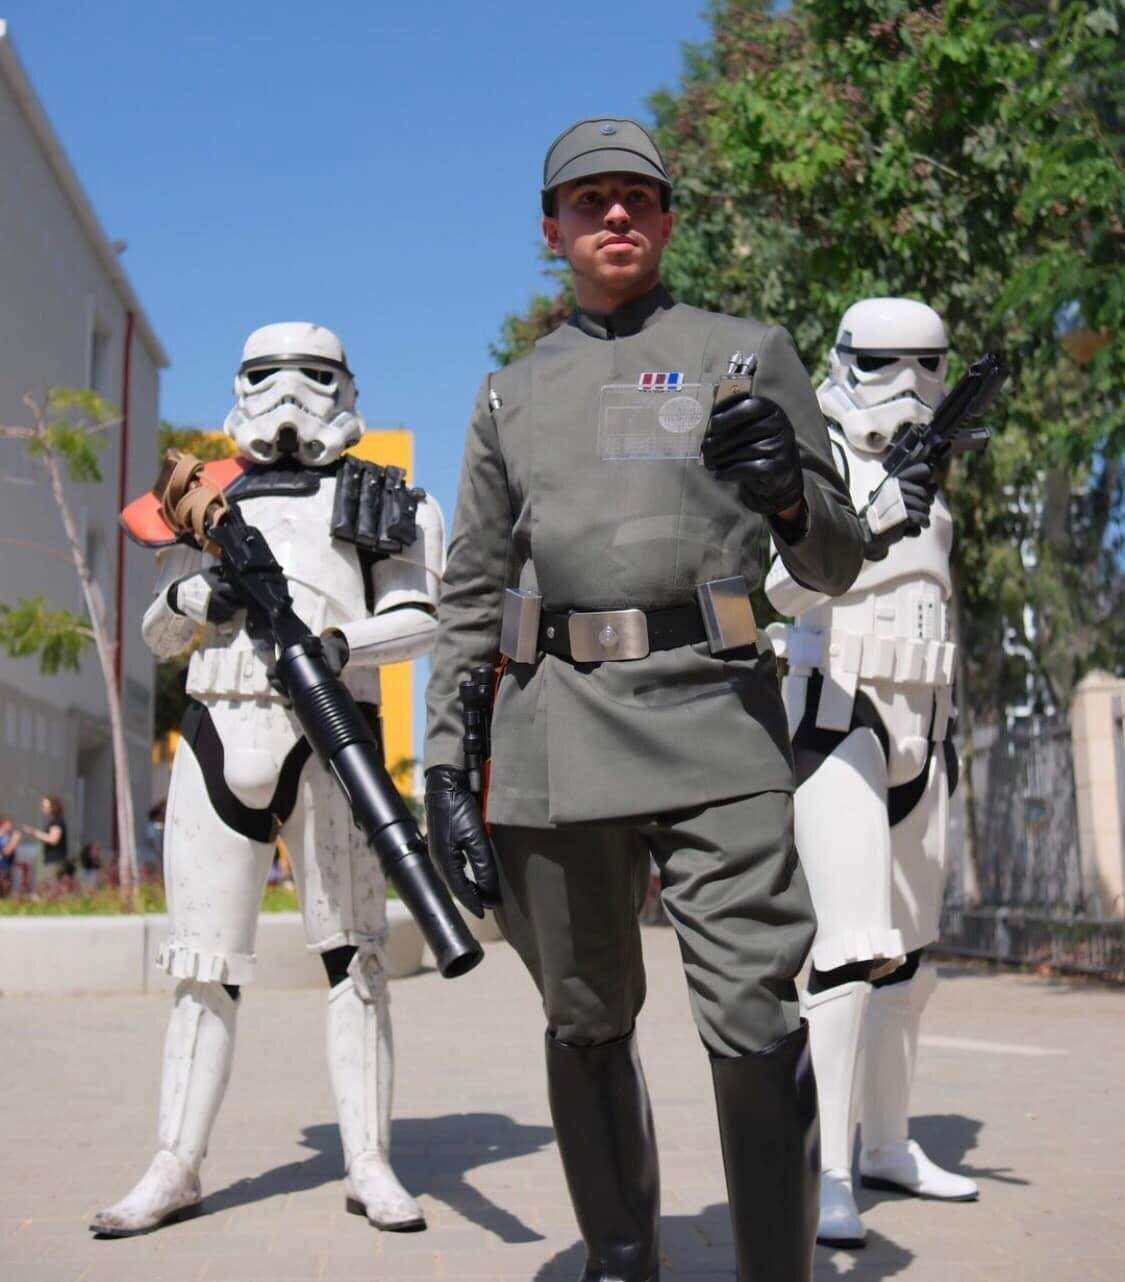 Everything is in order in this sector, ready to advance.

ID-44004, TD-78271 and TK-99014 from the @israel501st 

📸: ddofer

#501st #501stLegion #StarWars #ImperialOfficer #ImperialOfficerCorps #IOC #DutyHonorEmpire #BadGuysDoingGood